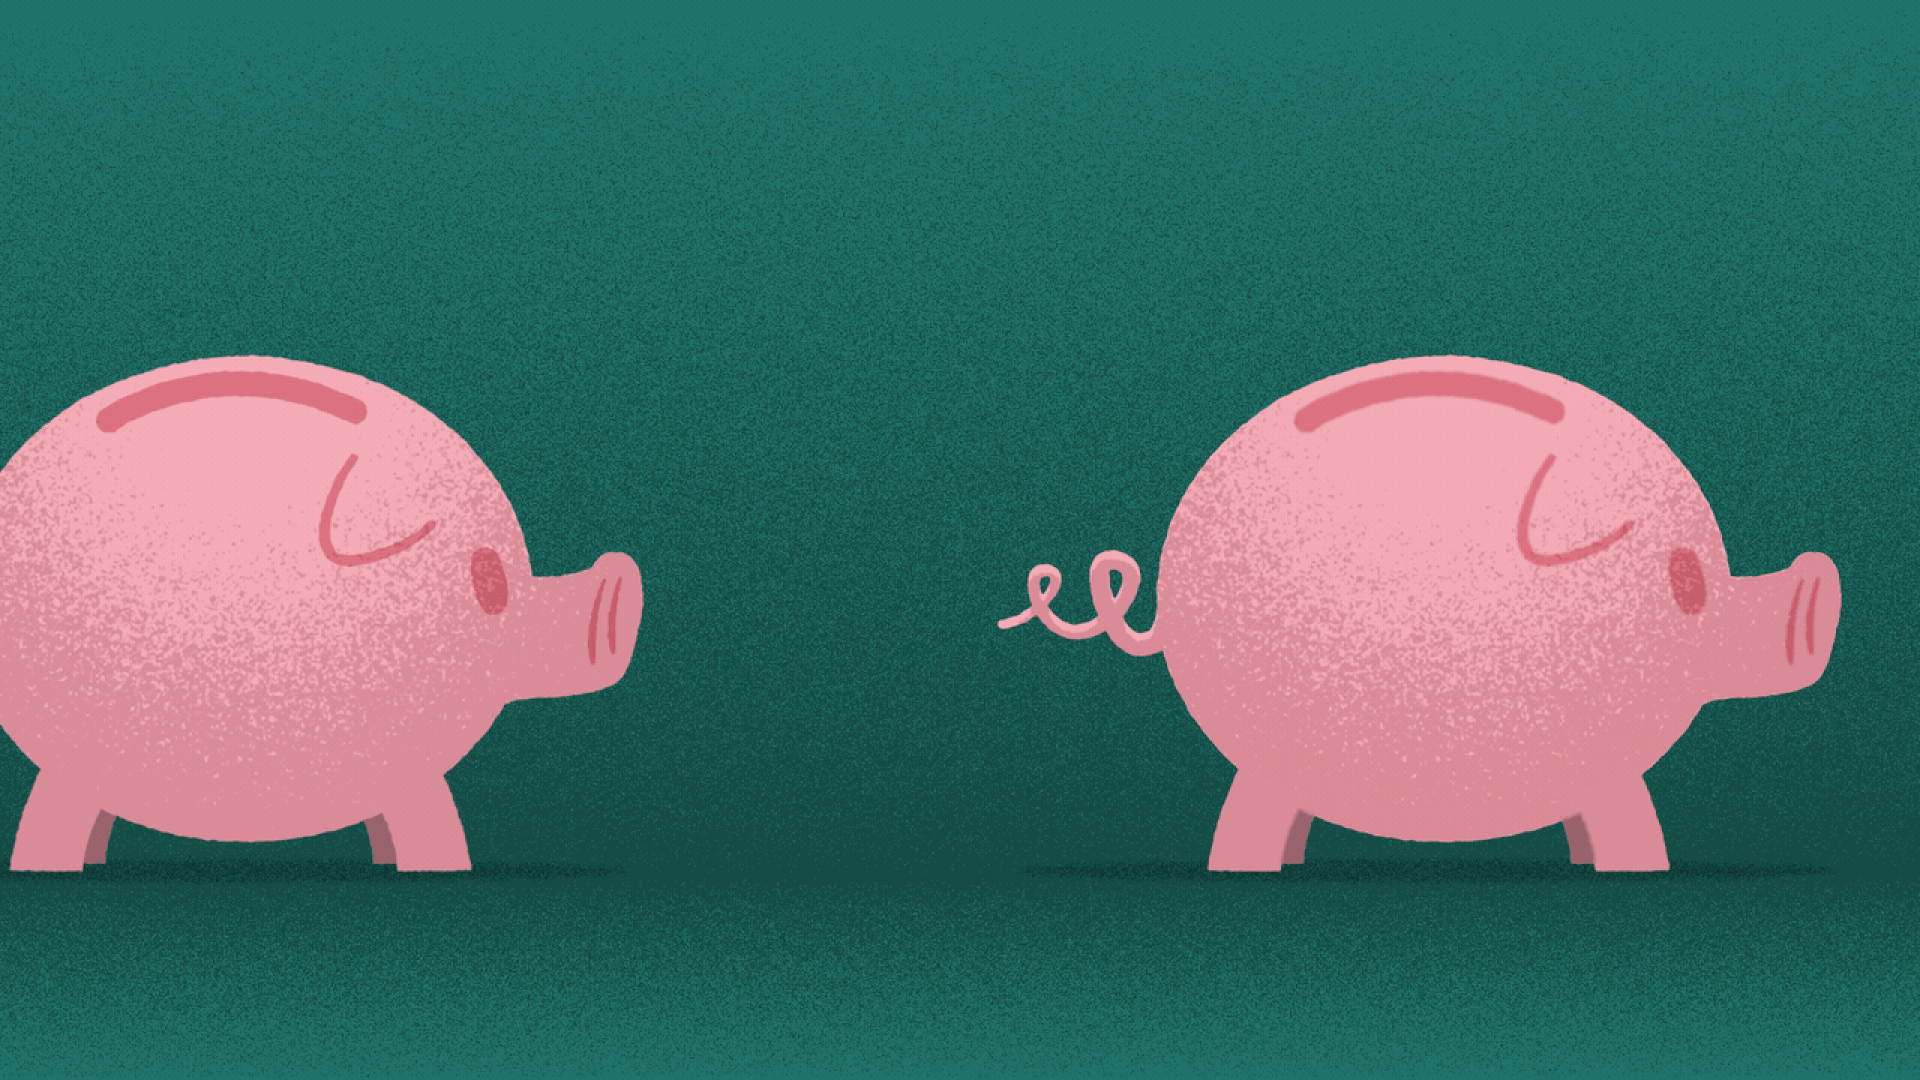 Illustration of one piggy bank eating another piggy bank.